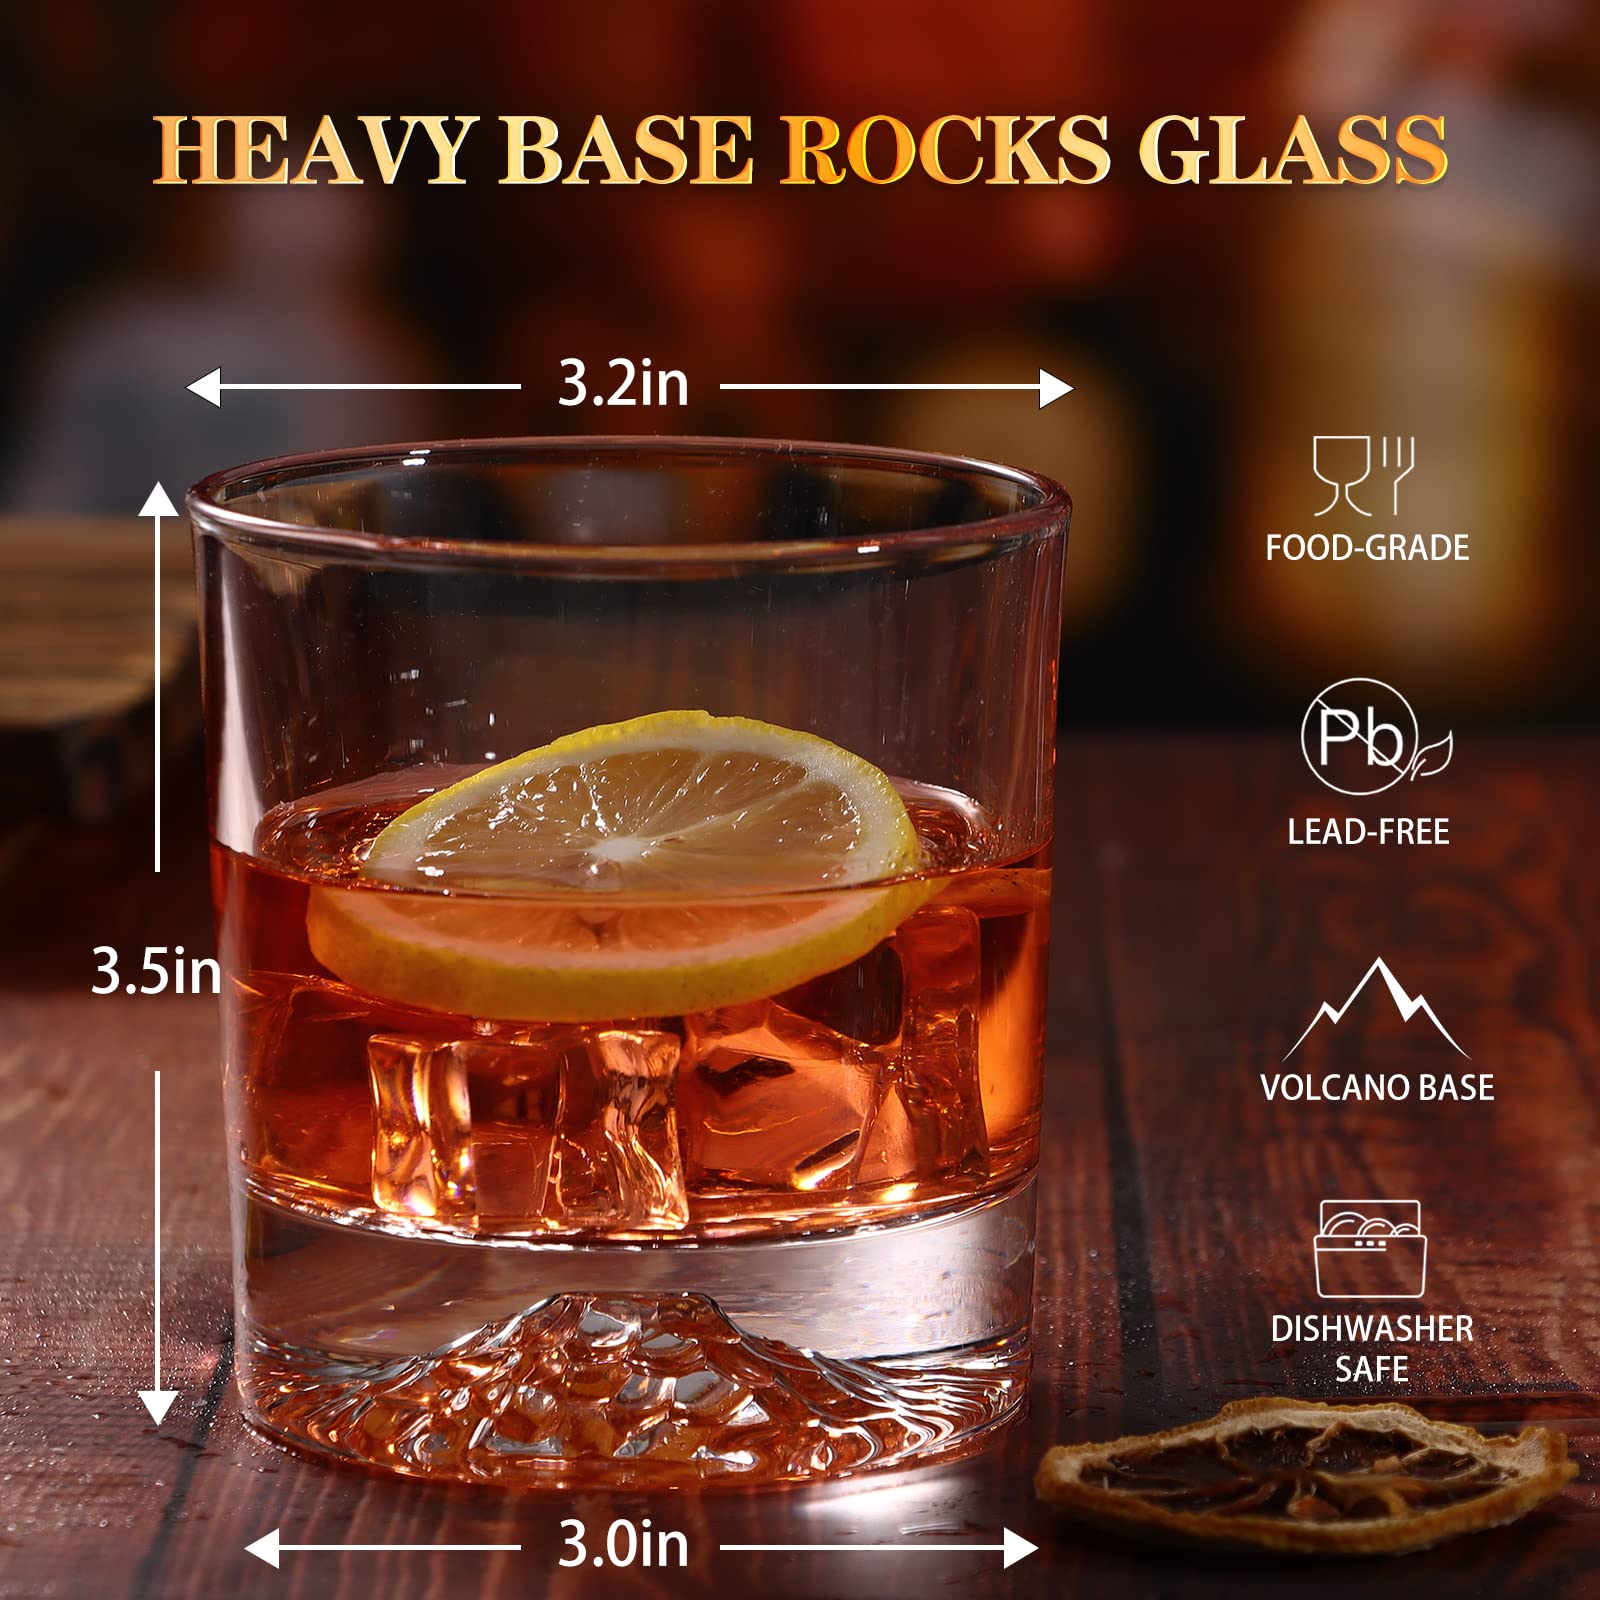 veecom Whiskey Glasses Set 4, Mountain Whiskey Glasses, 10oz Rocks Glasses, Heavy Bottom Bourbon Glass Gifts for Men, Old Fashioned Whisky Glass Sets for Cocktail, Scotch